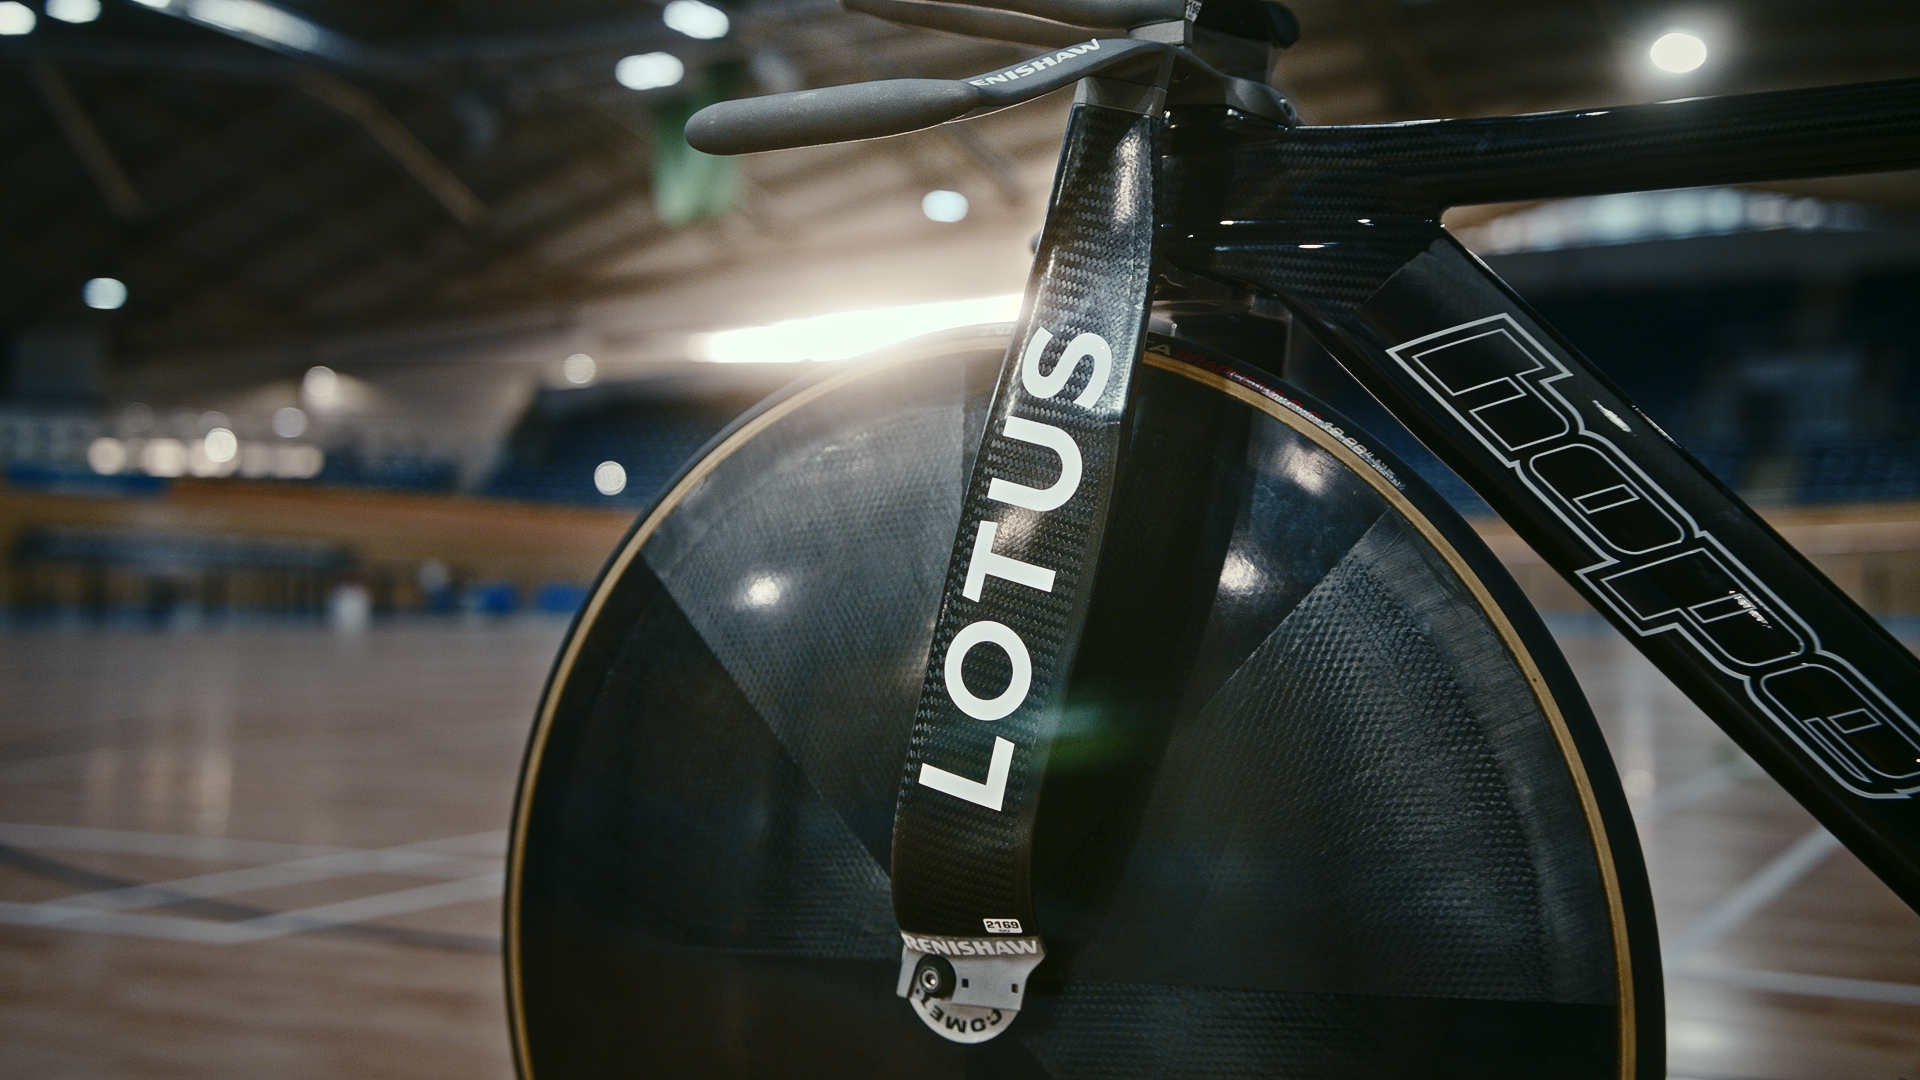 A close-up shot of the Hope Lotus bicycle at the Tokyo 2020 Olympics